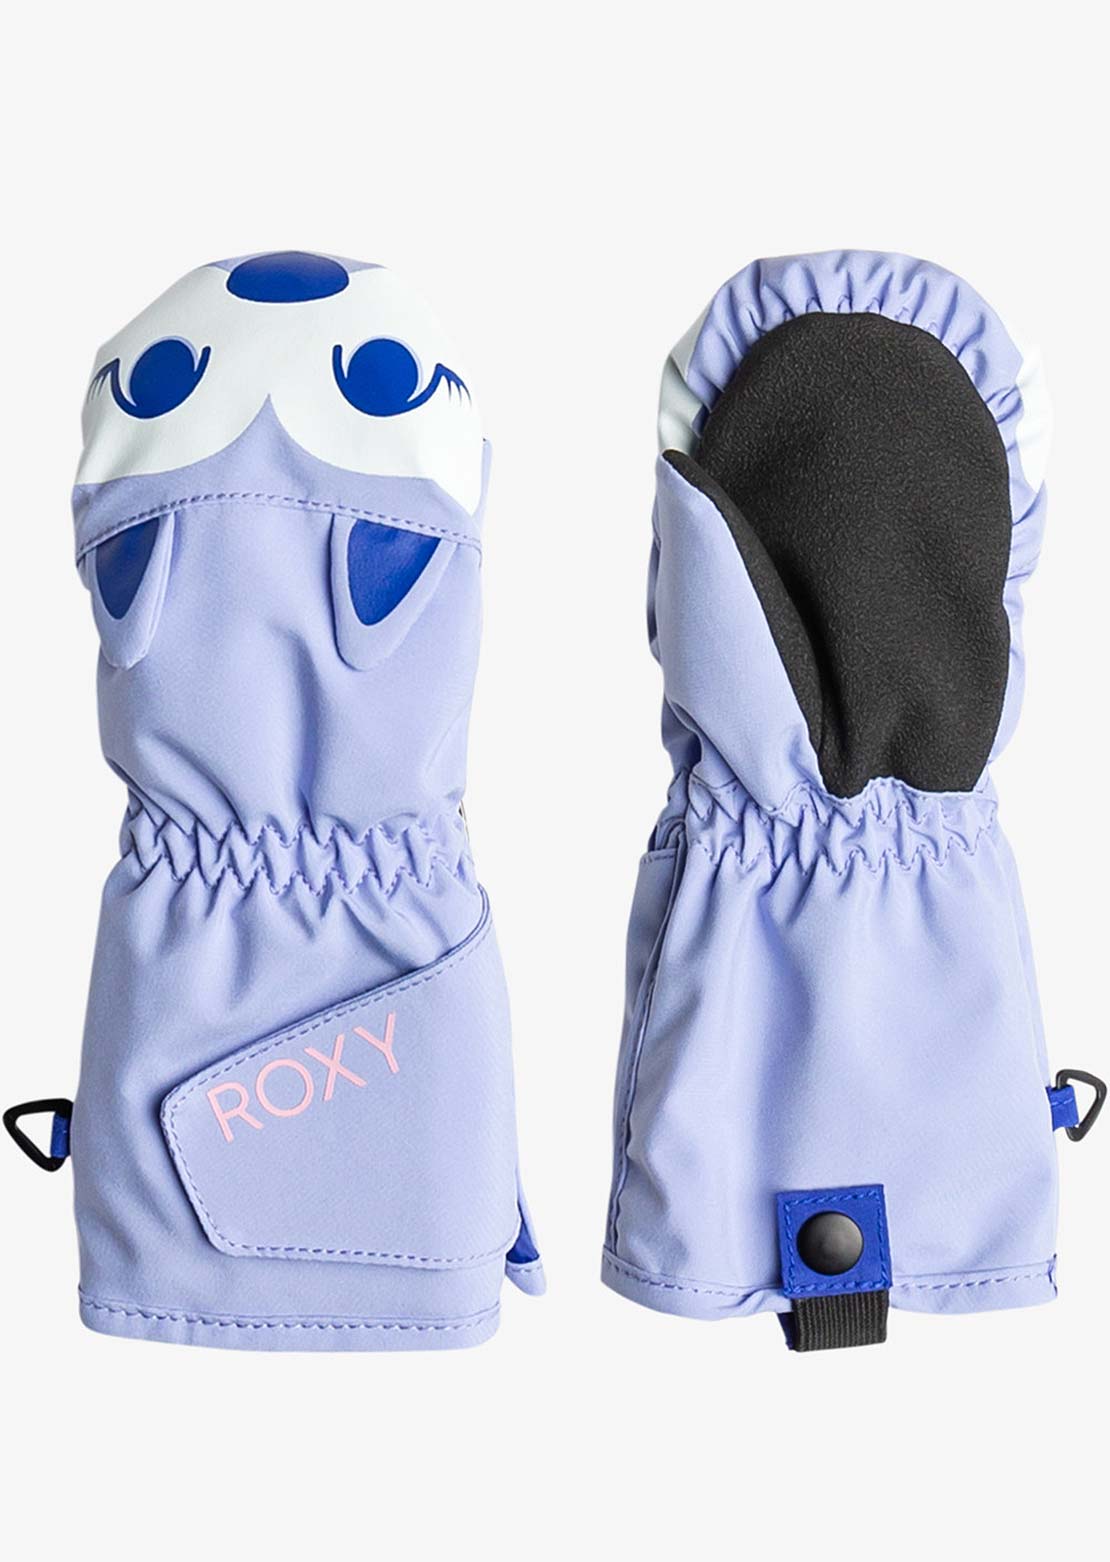 Roxy Toddler Snows Up Mitts Easter Egg